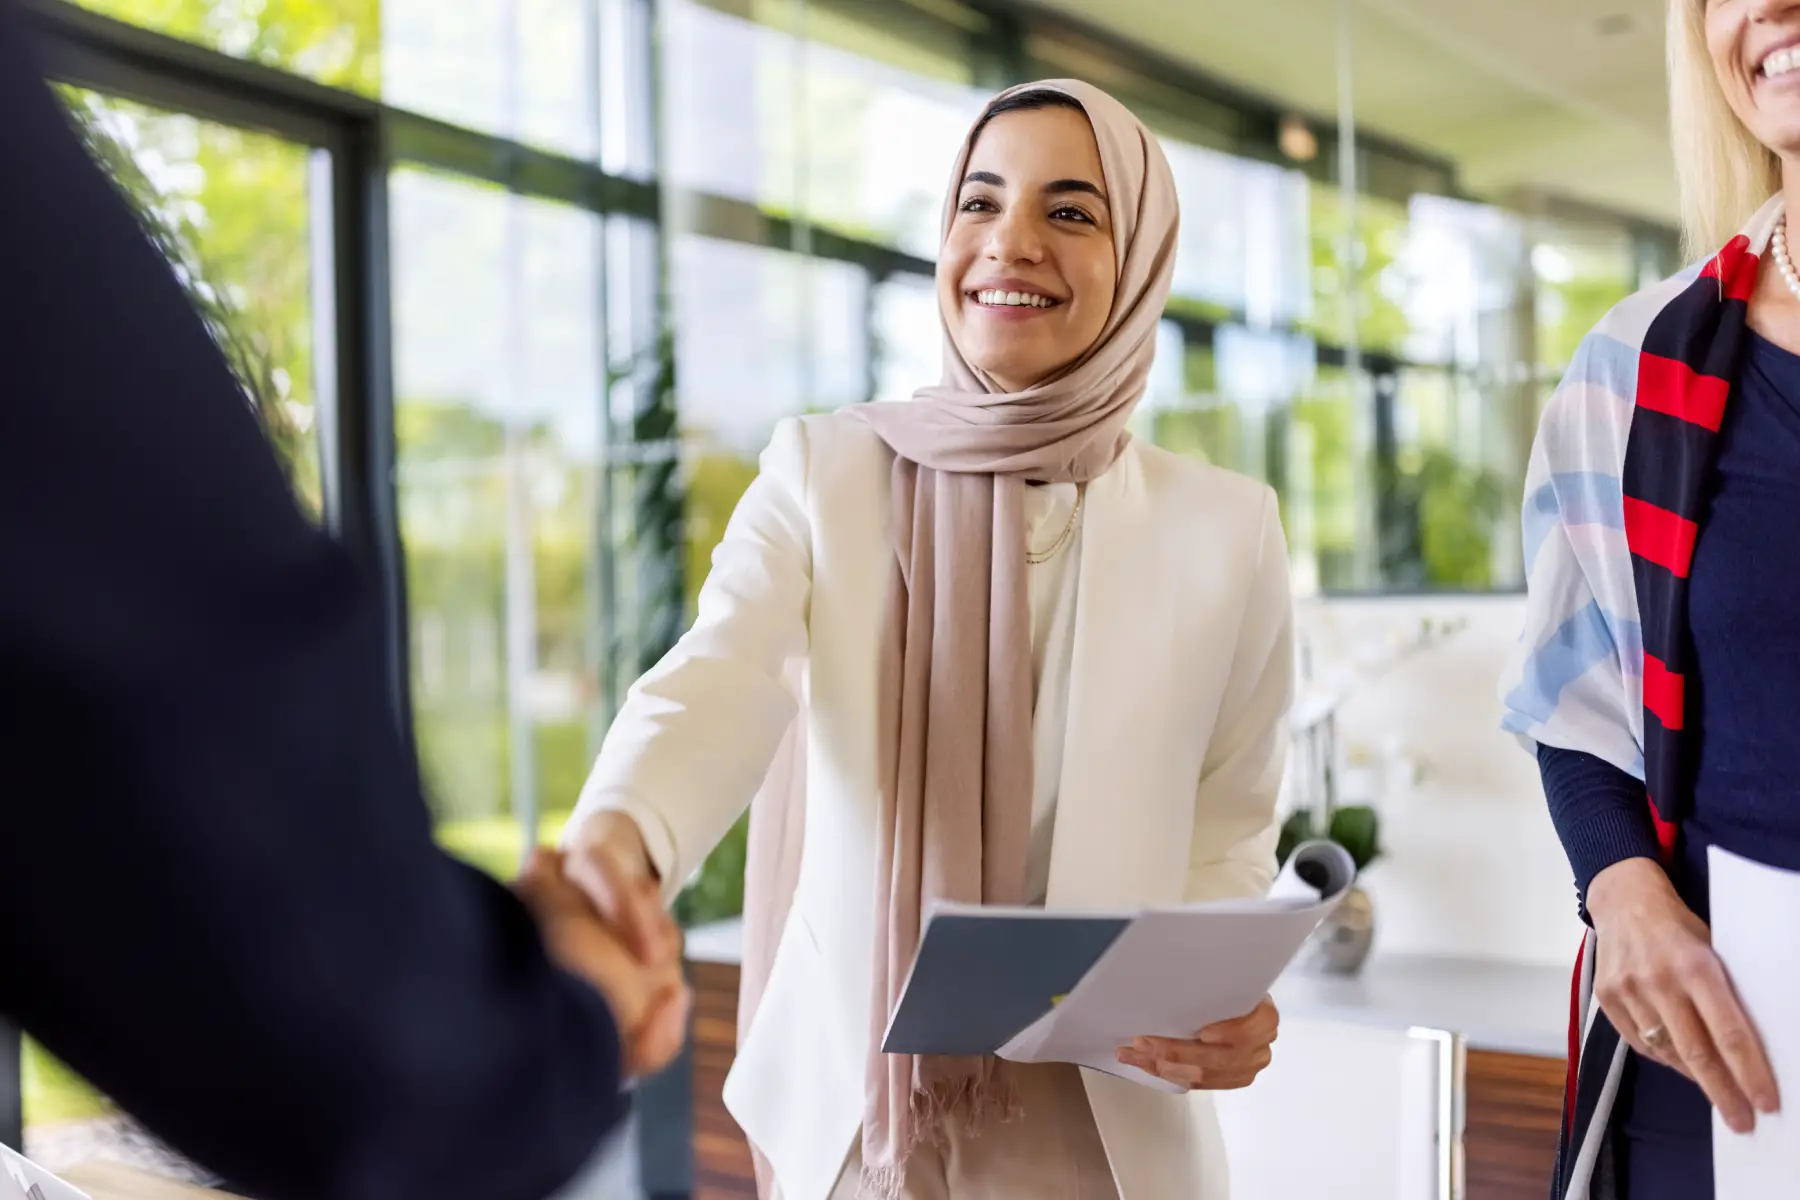 Woman wearing headscarf smiles and gives a handshake in an office